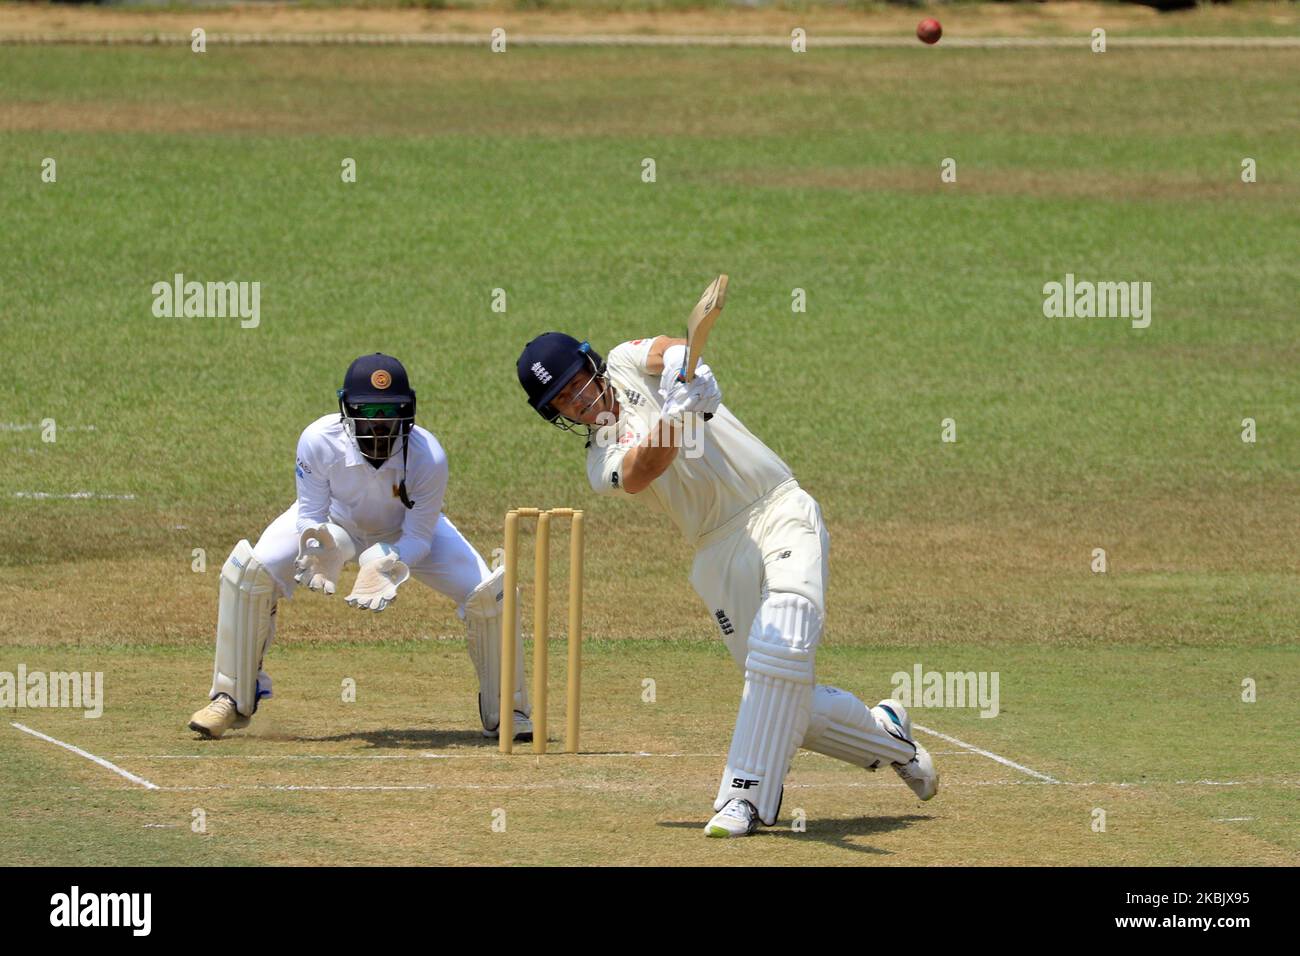 England cricketer Joe Denly steps out and plays a shot during the first day of the 2nd Warm up cricket match between Sri Lanka's Board President's XI and England at P Sara Oval on March 12, 2020 in Colombo, Sri Lanka. (Photo by Tharaka Basnayaka/NurPhoto) Stock Photo